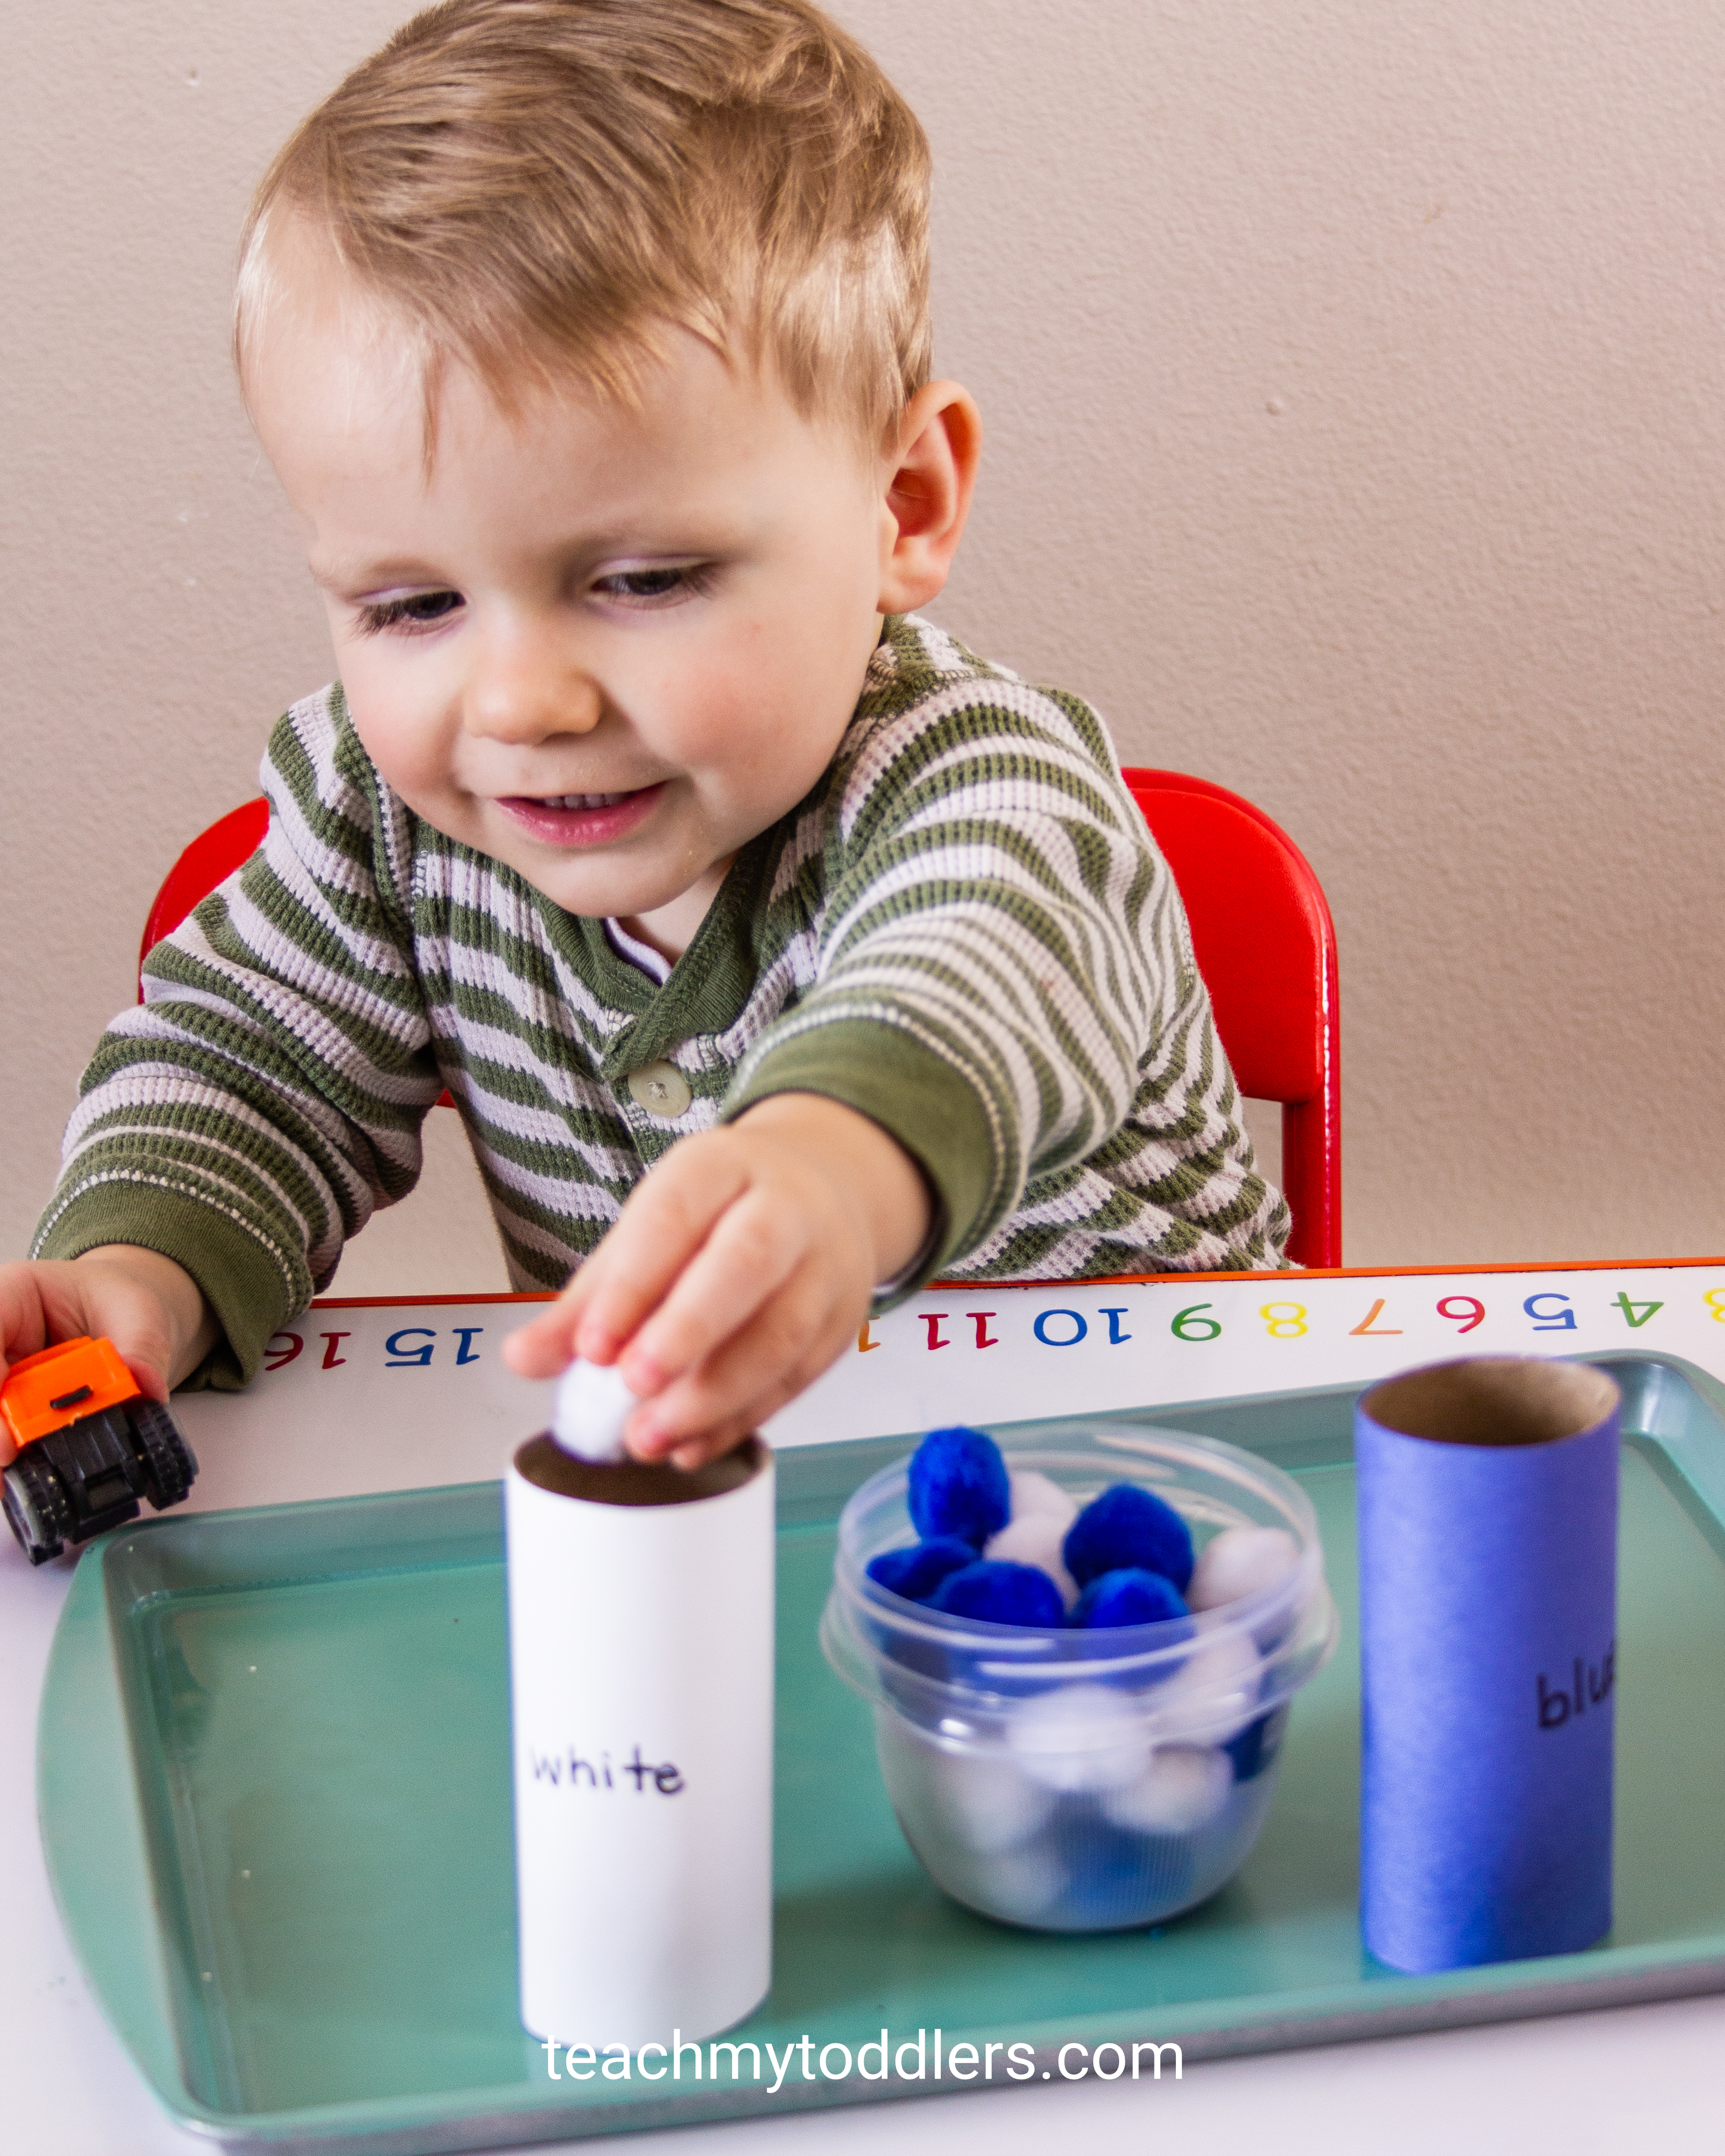 Use these great car activities to teach your toddlers about cars